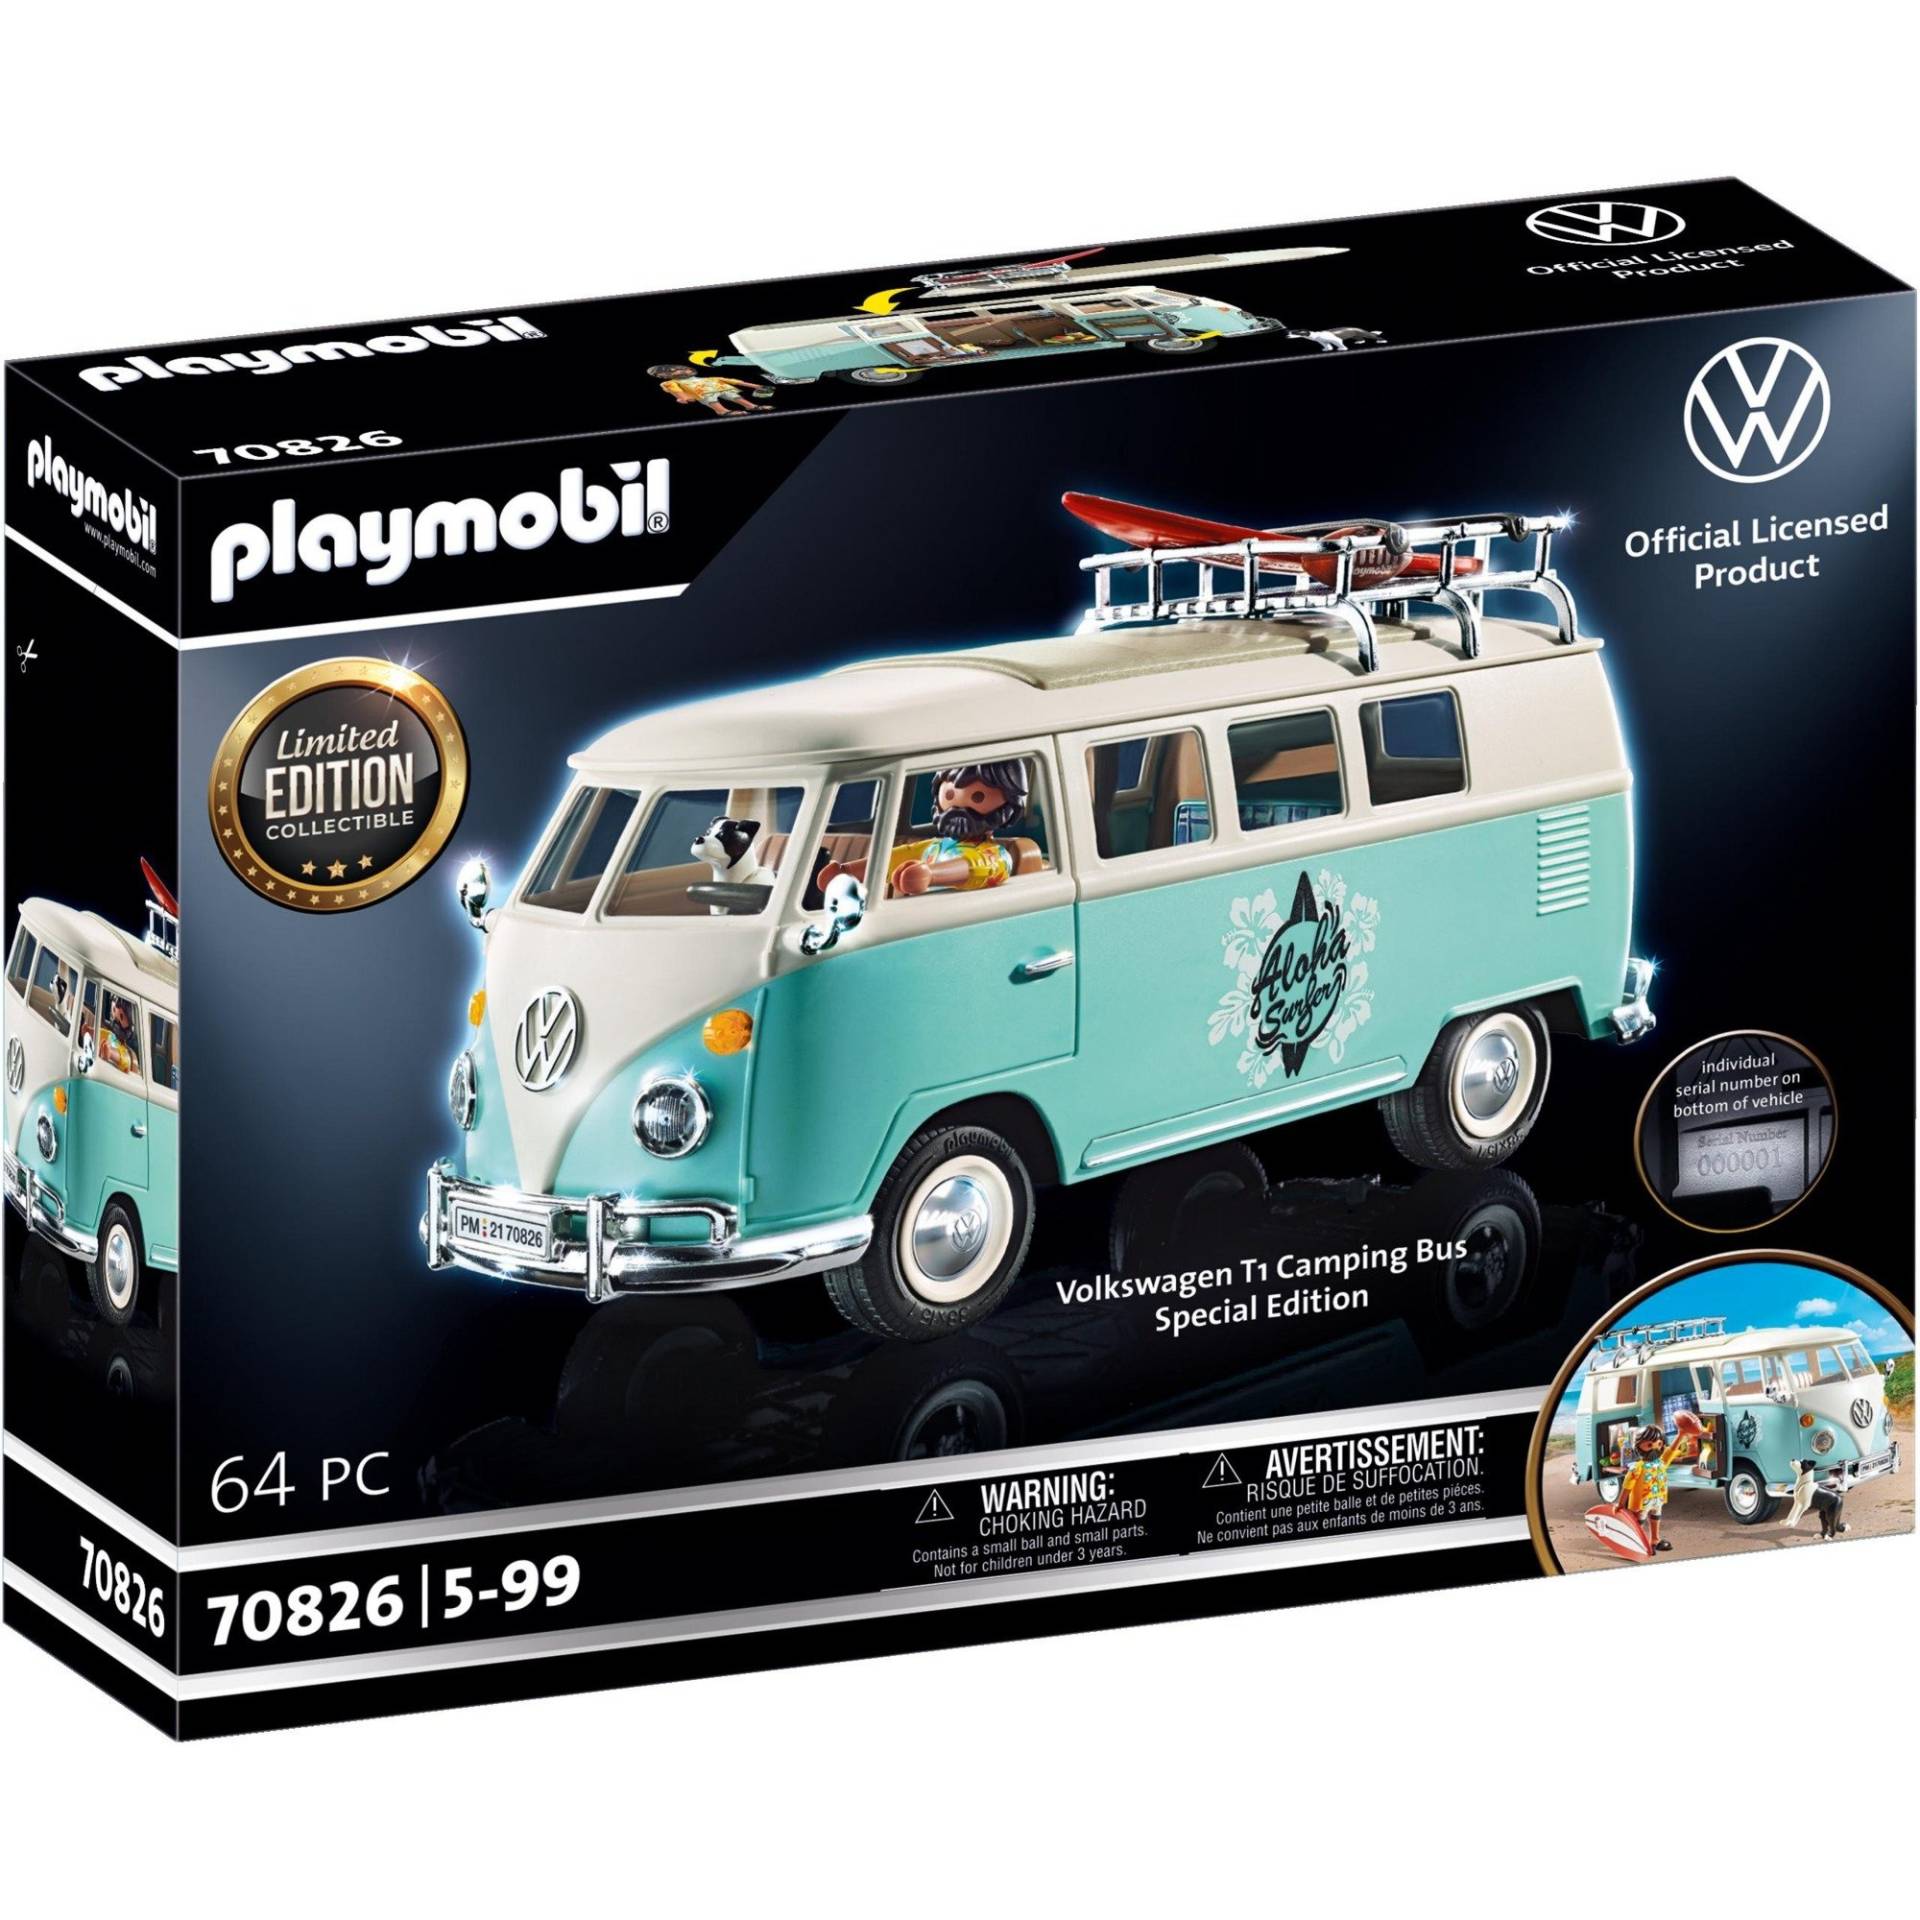 70826 Famous Cars Volkswagen T1 Camping Bus - Special Edition, Konstruktionsspielzeug von PLAYMOBIL